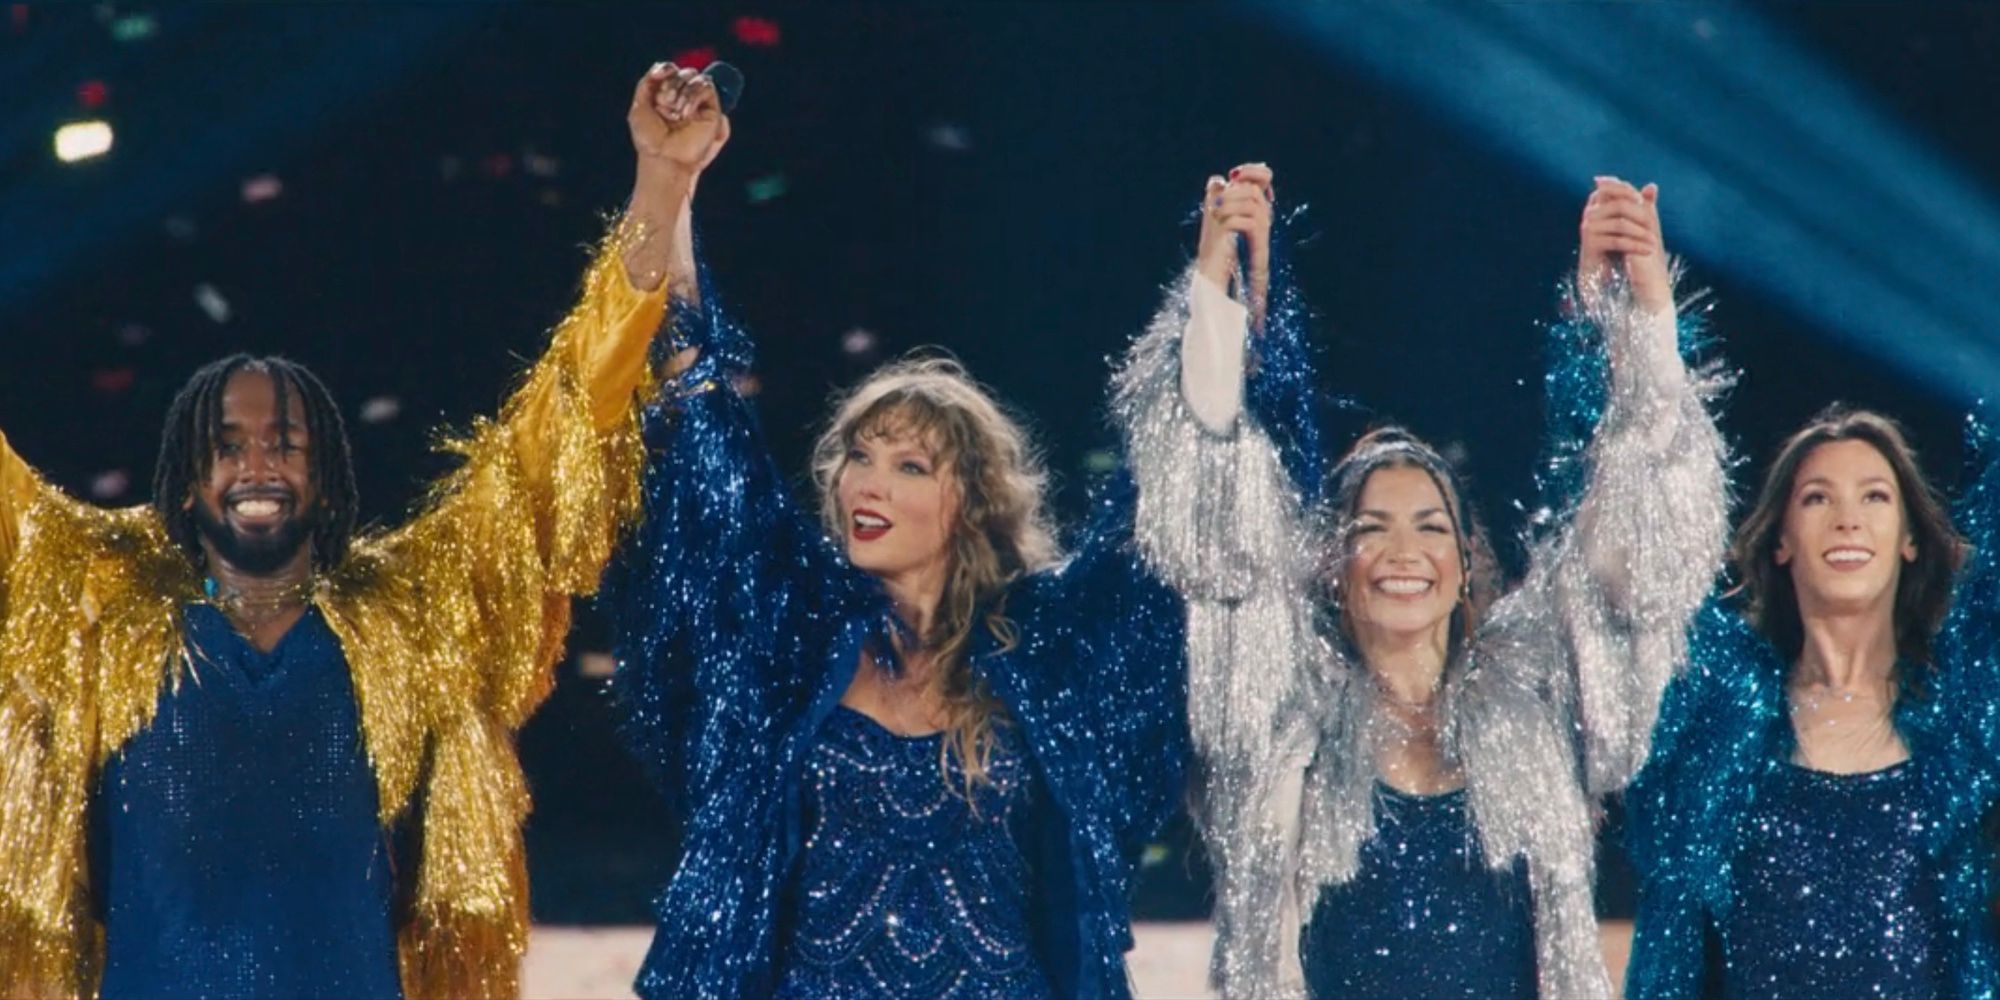 Taylor Swift bows with her backup dancers during "Karma" finale in The Eras Tour movie.